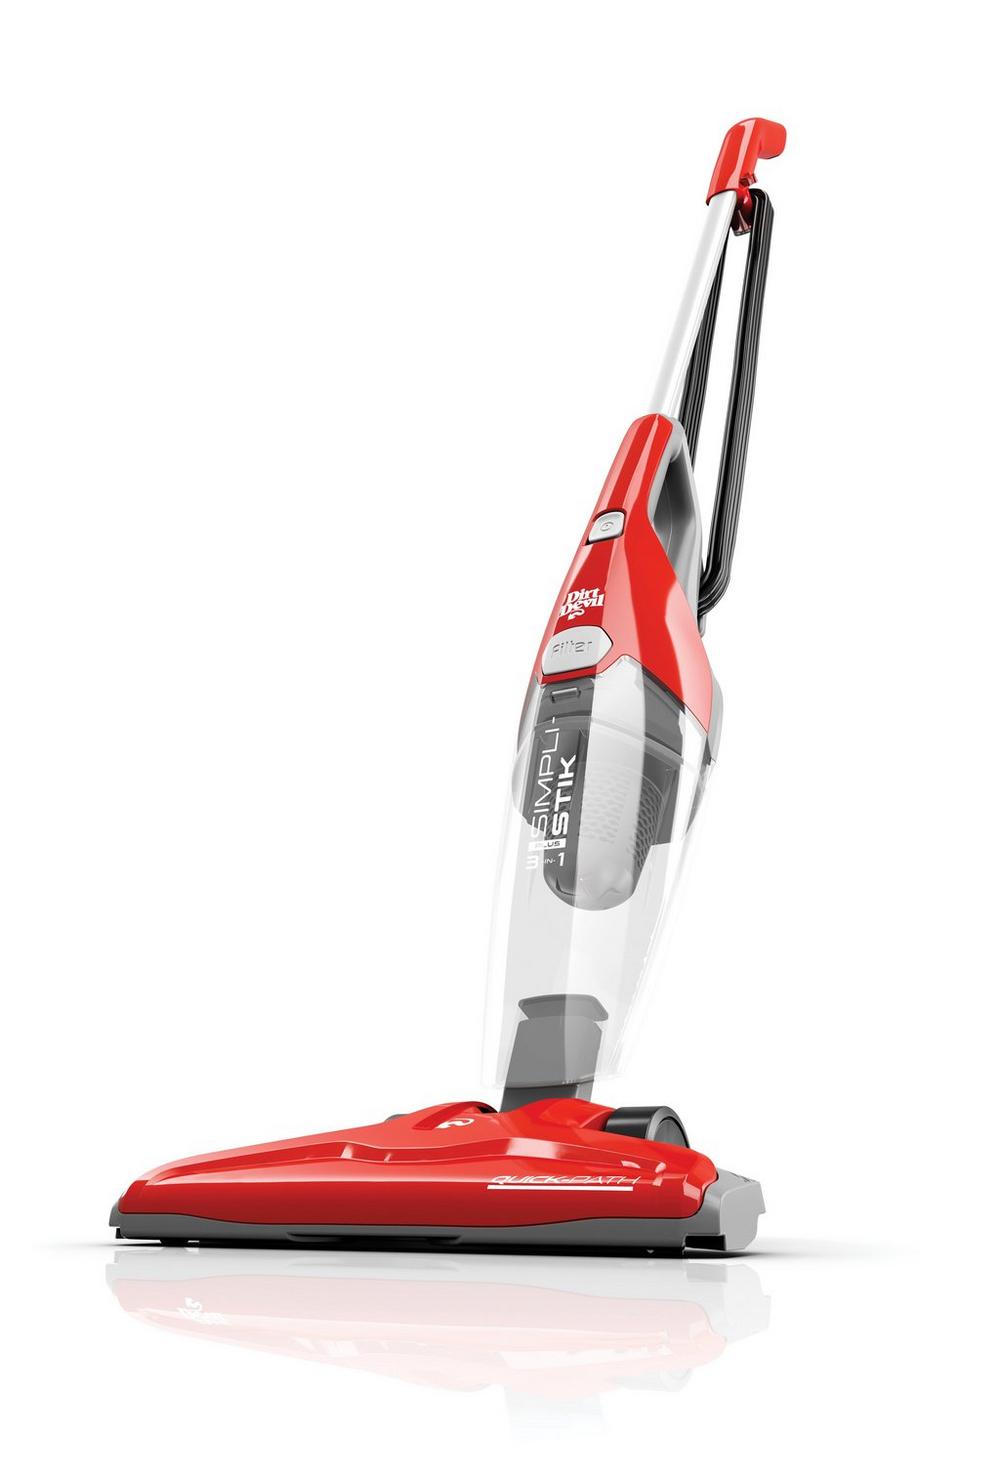  Dirt Devil Vibe 3-in-1 Vacuum Cleaner, Lightweight Corded  Bagless Stick Vac with Handheld, SD20020, Red - Upright Vacuums